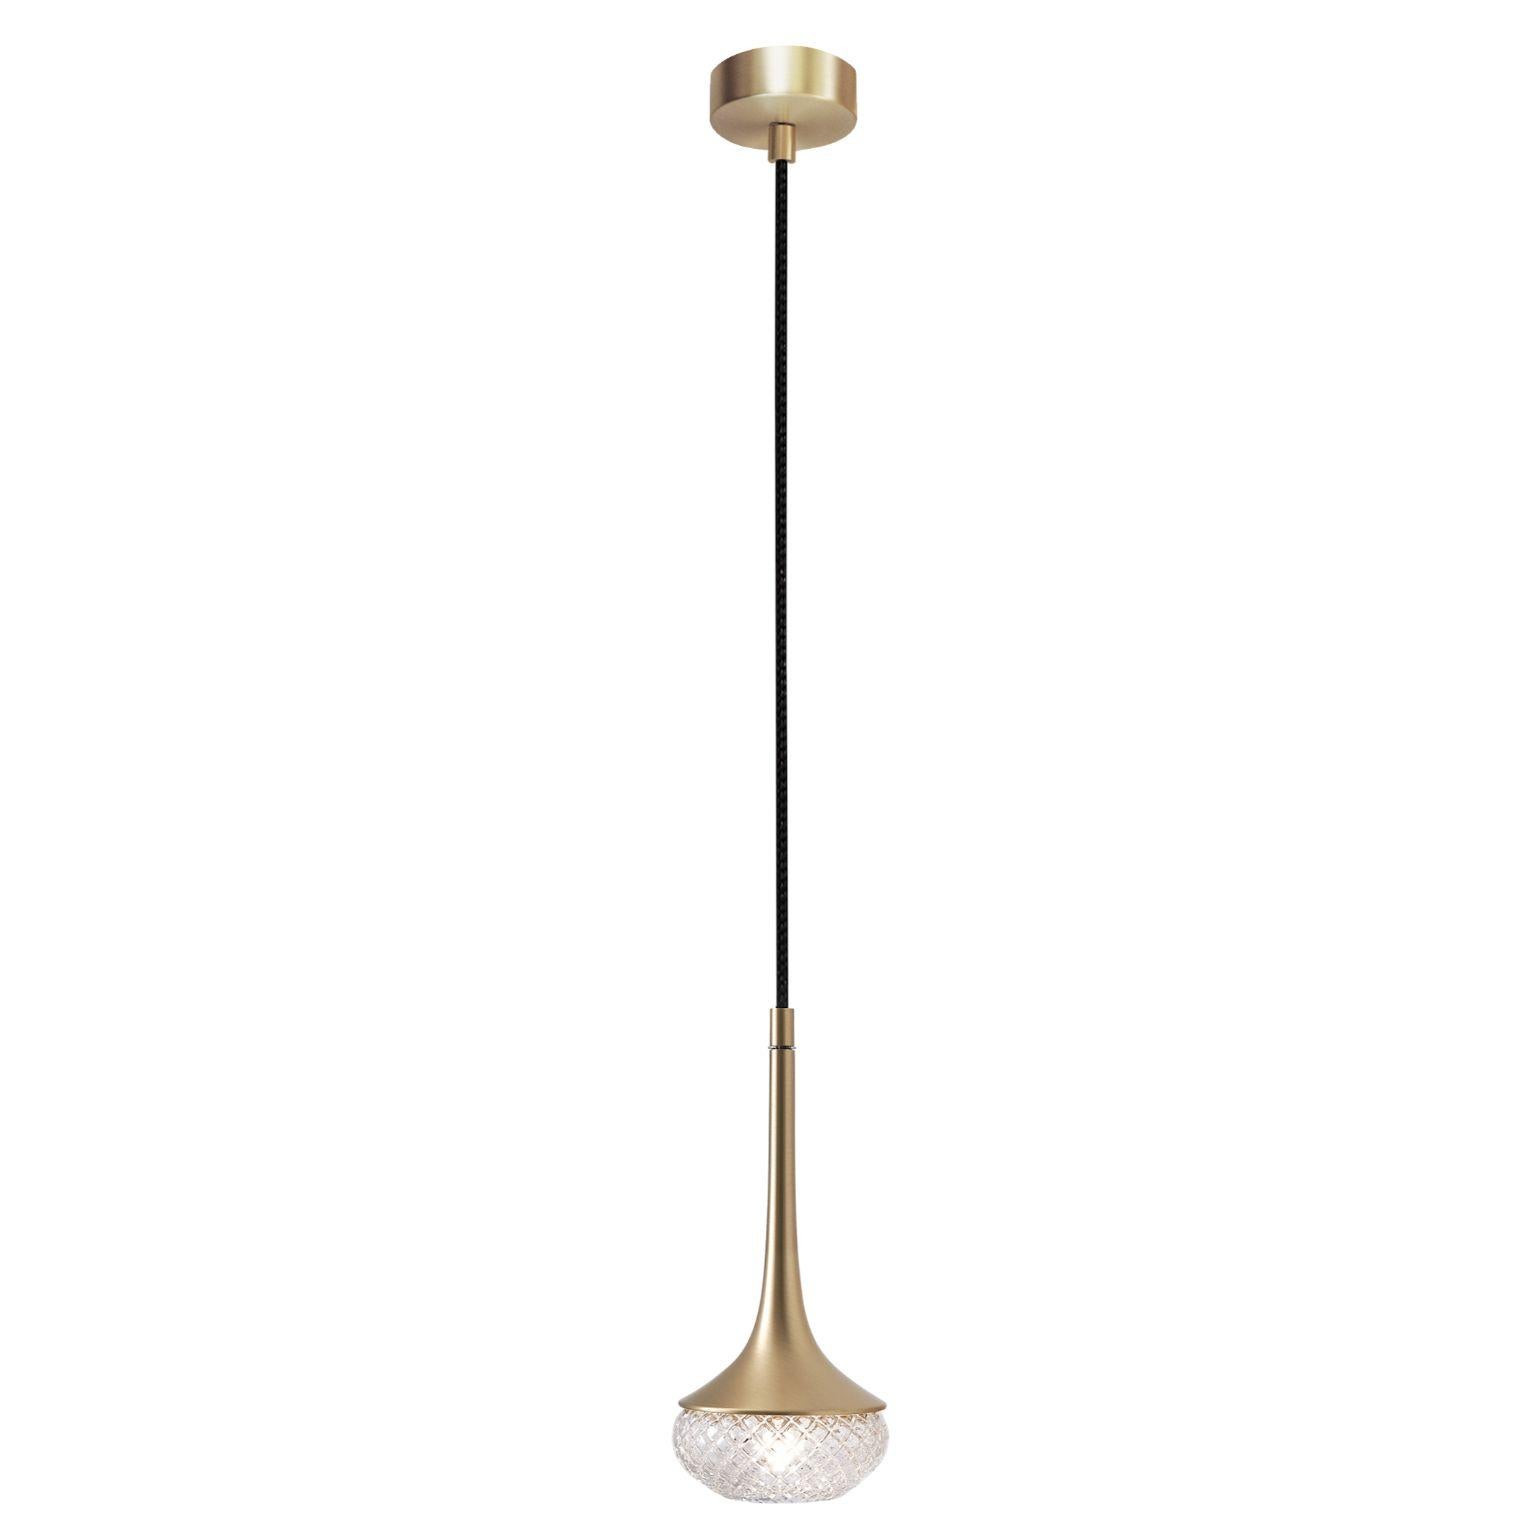 Flea pendant by Emilie Cathelineau
Dimensions: D 11.5 x H 225 cm
Materials: Solid brass, Mouth-blown glass, Textile cable
Others finishes and dimensions are available.

All our lamps can be wired according to each country. If sold to the USA it